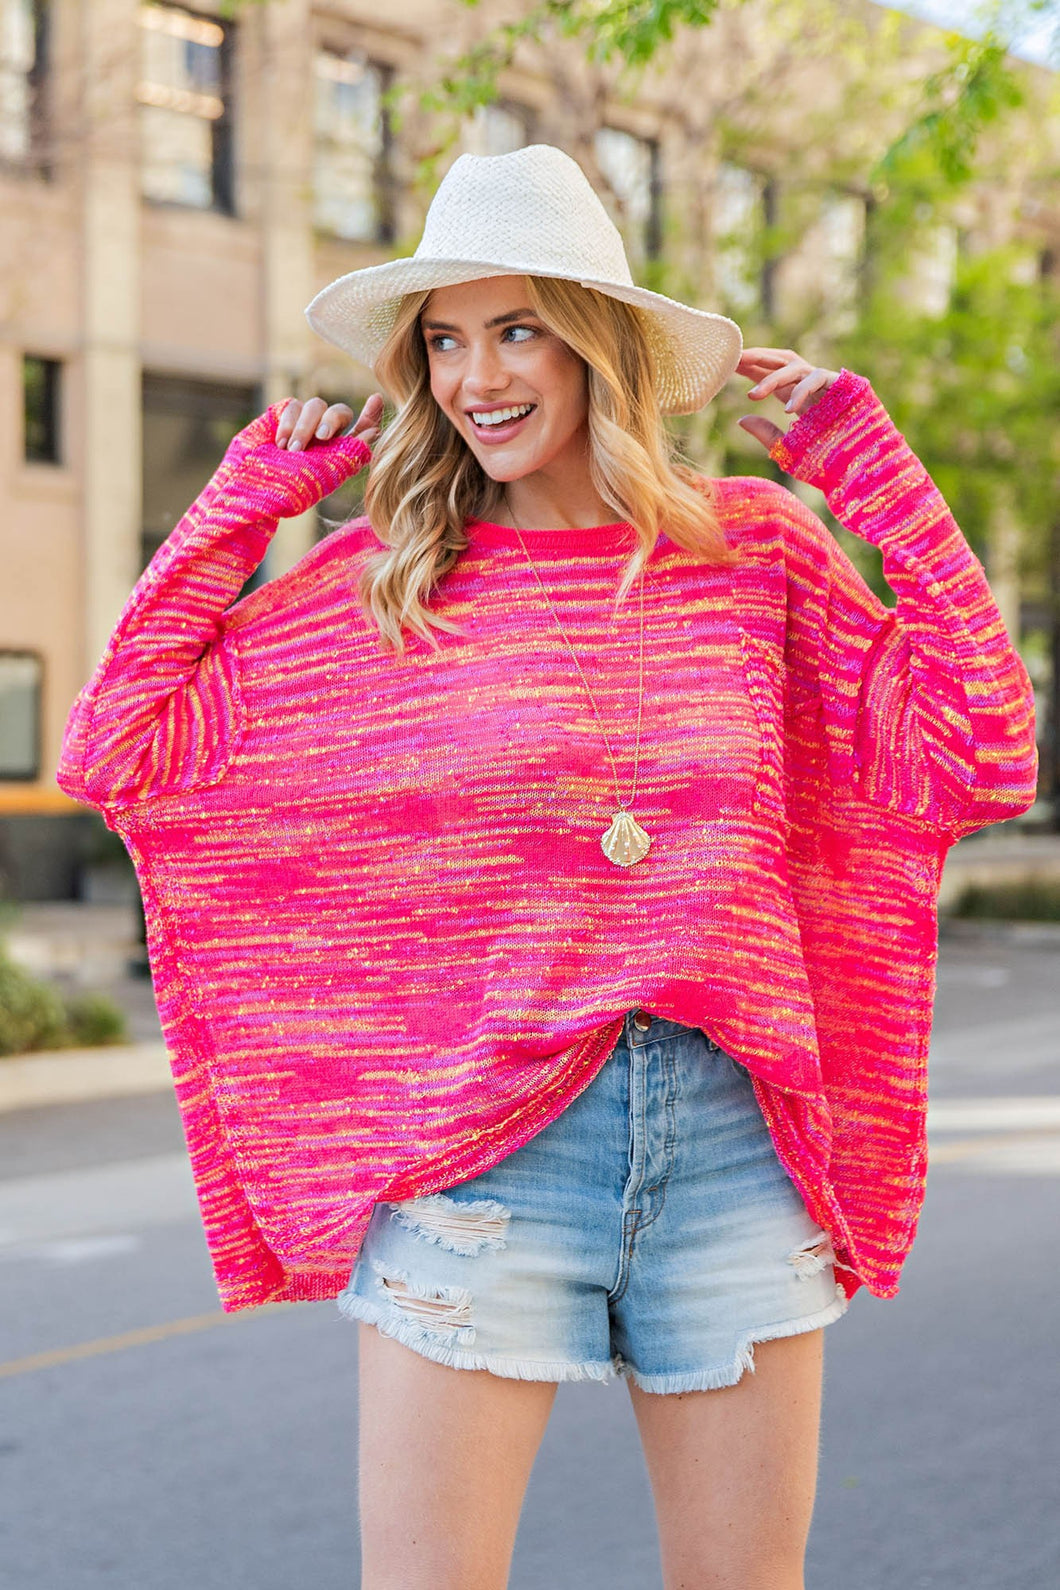 Easel Multi Color Light Weight Sweater in Hot Pink Top Easel   